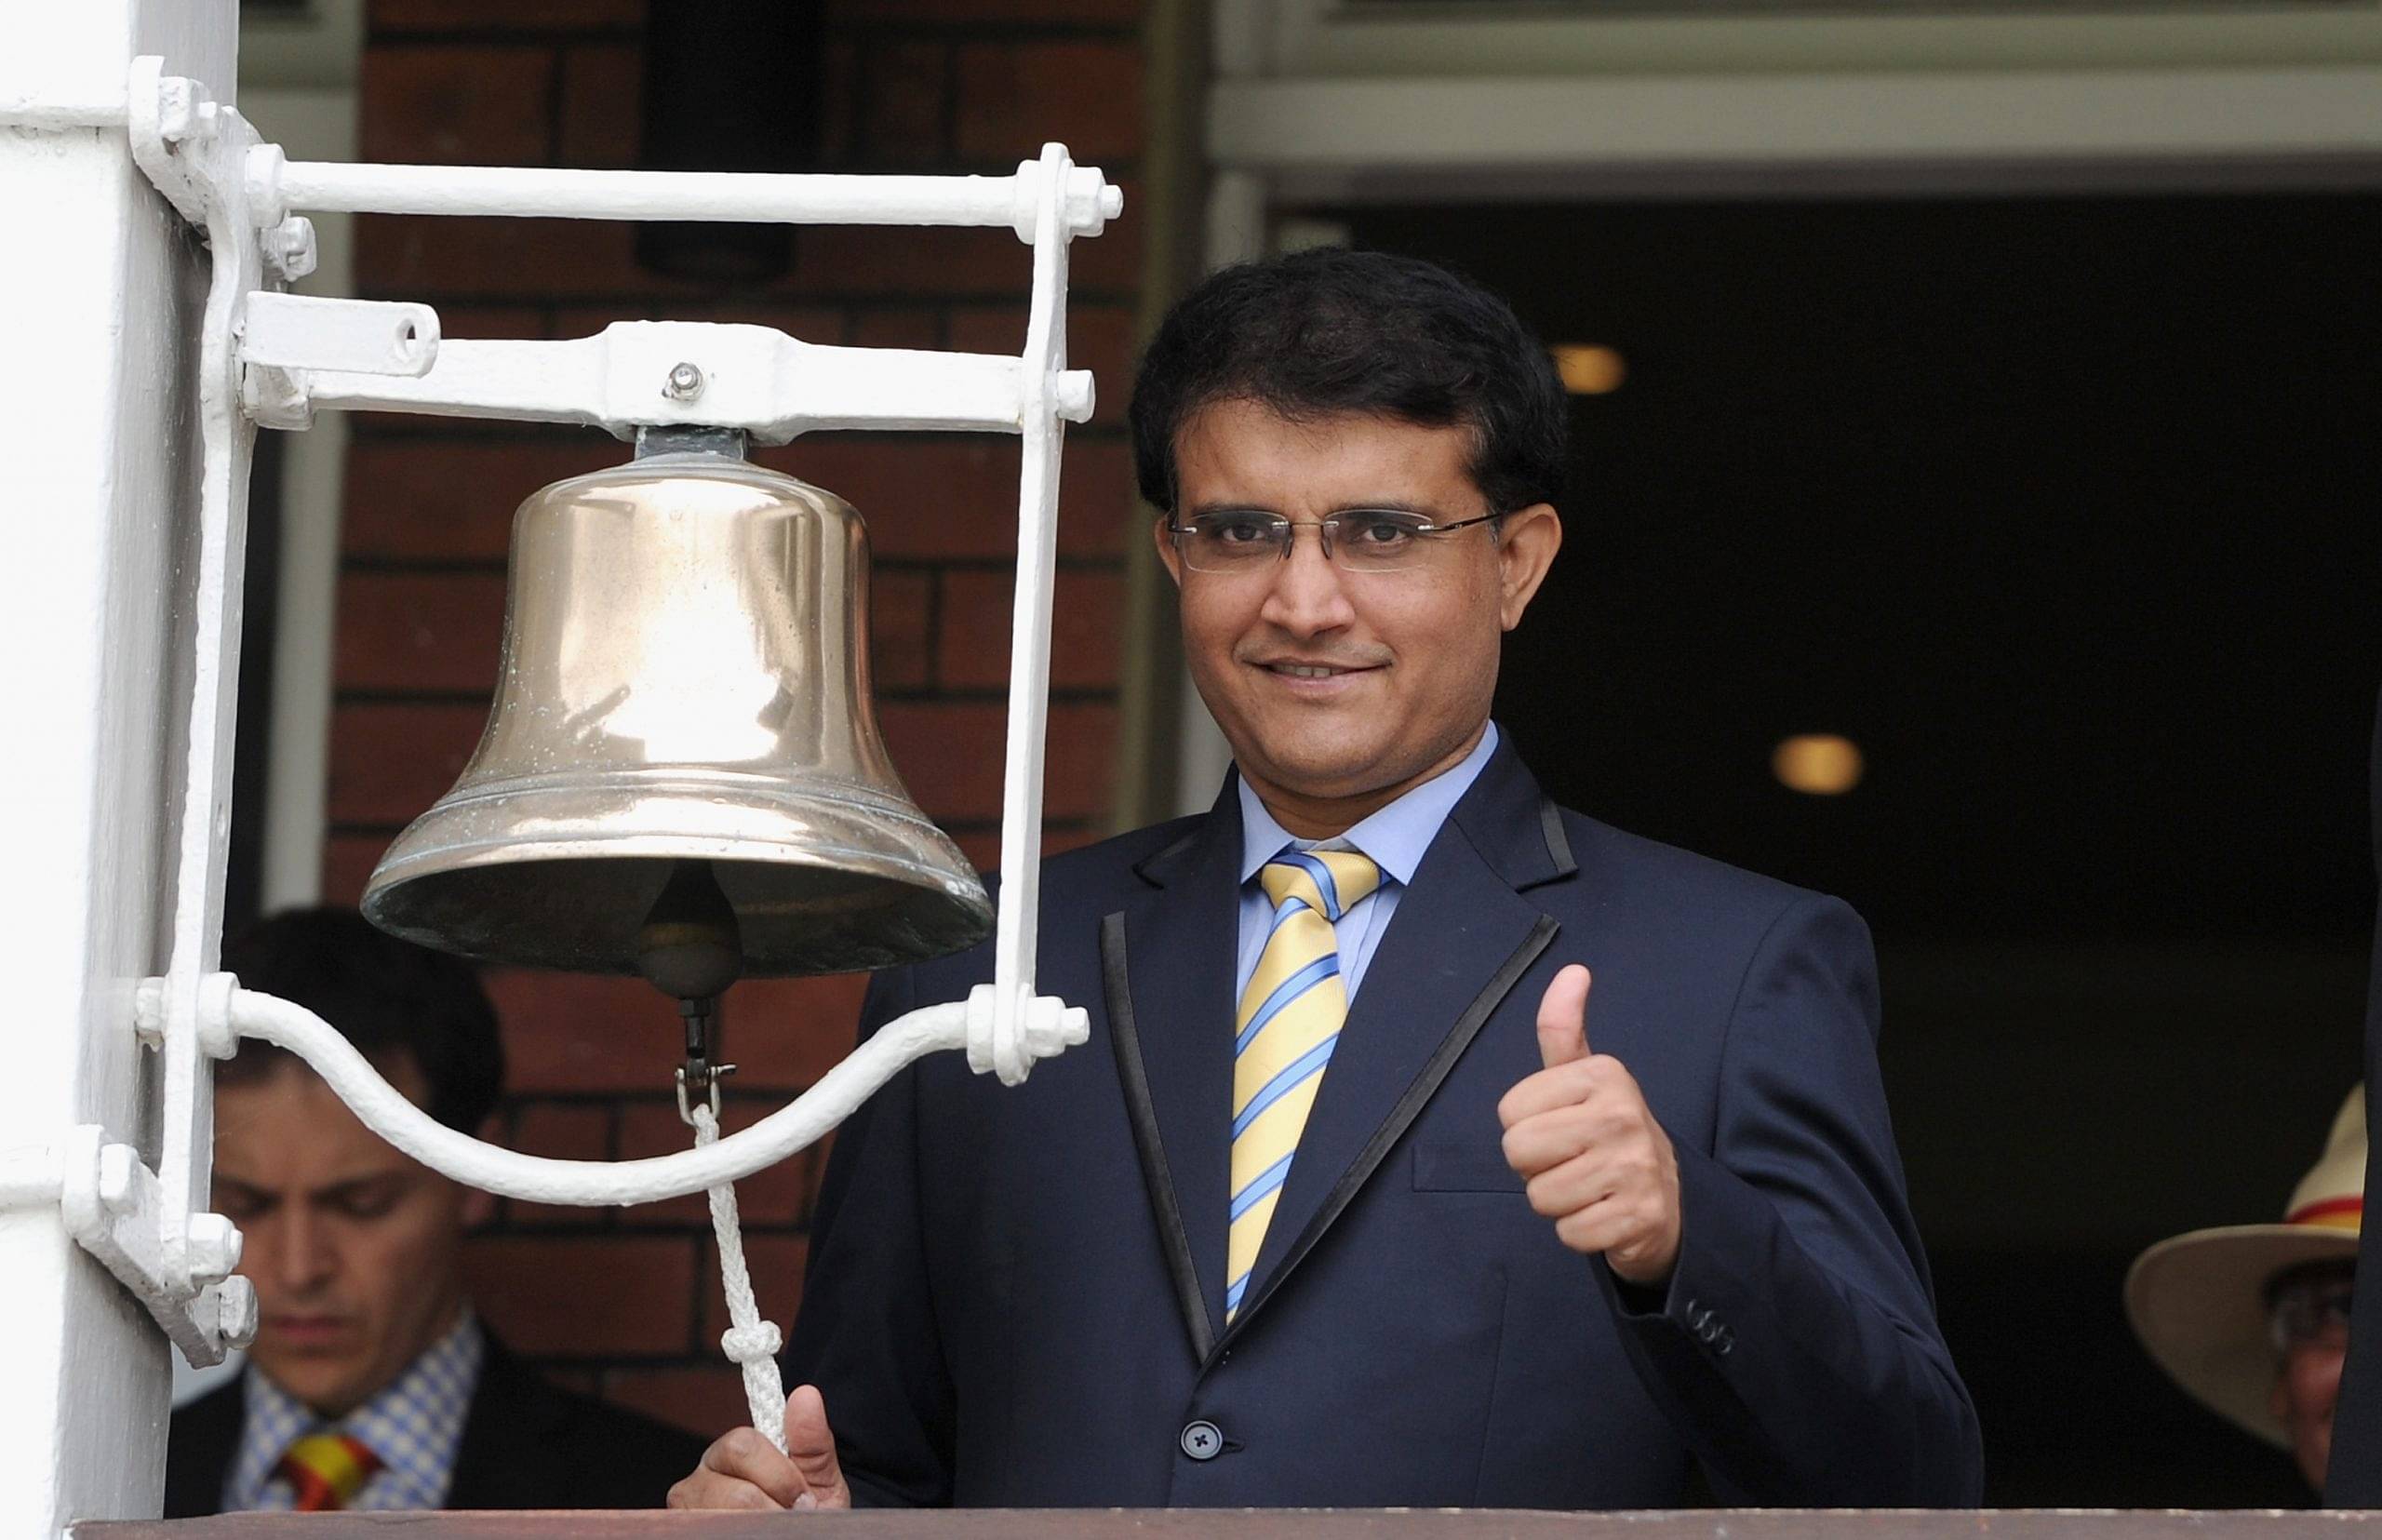 Sourav Ganguly's brother Snehashish Ganguly's wife and in-laws test positive for COVID-19